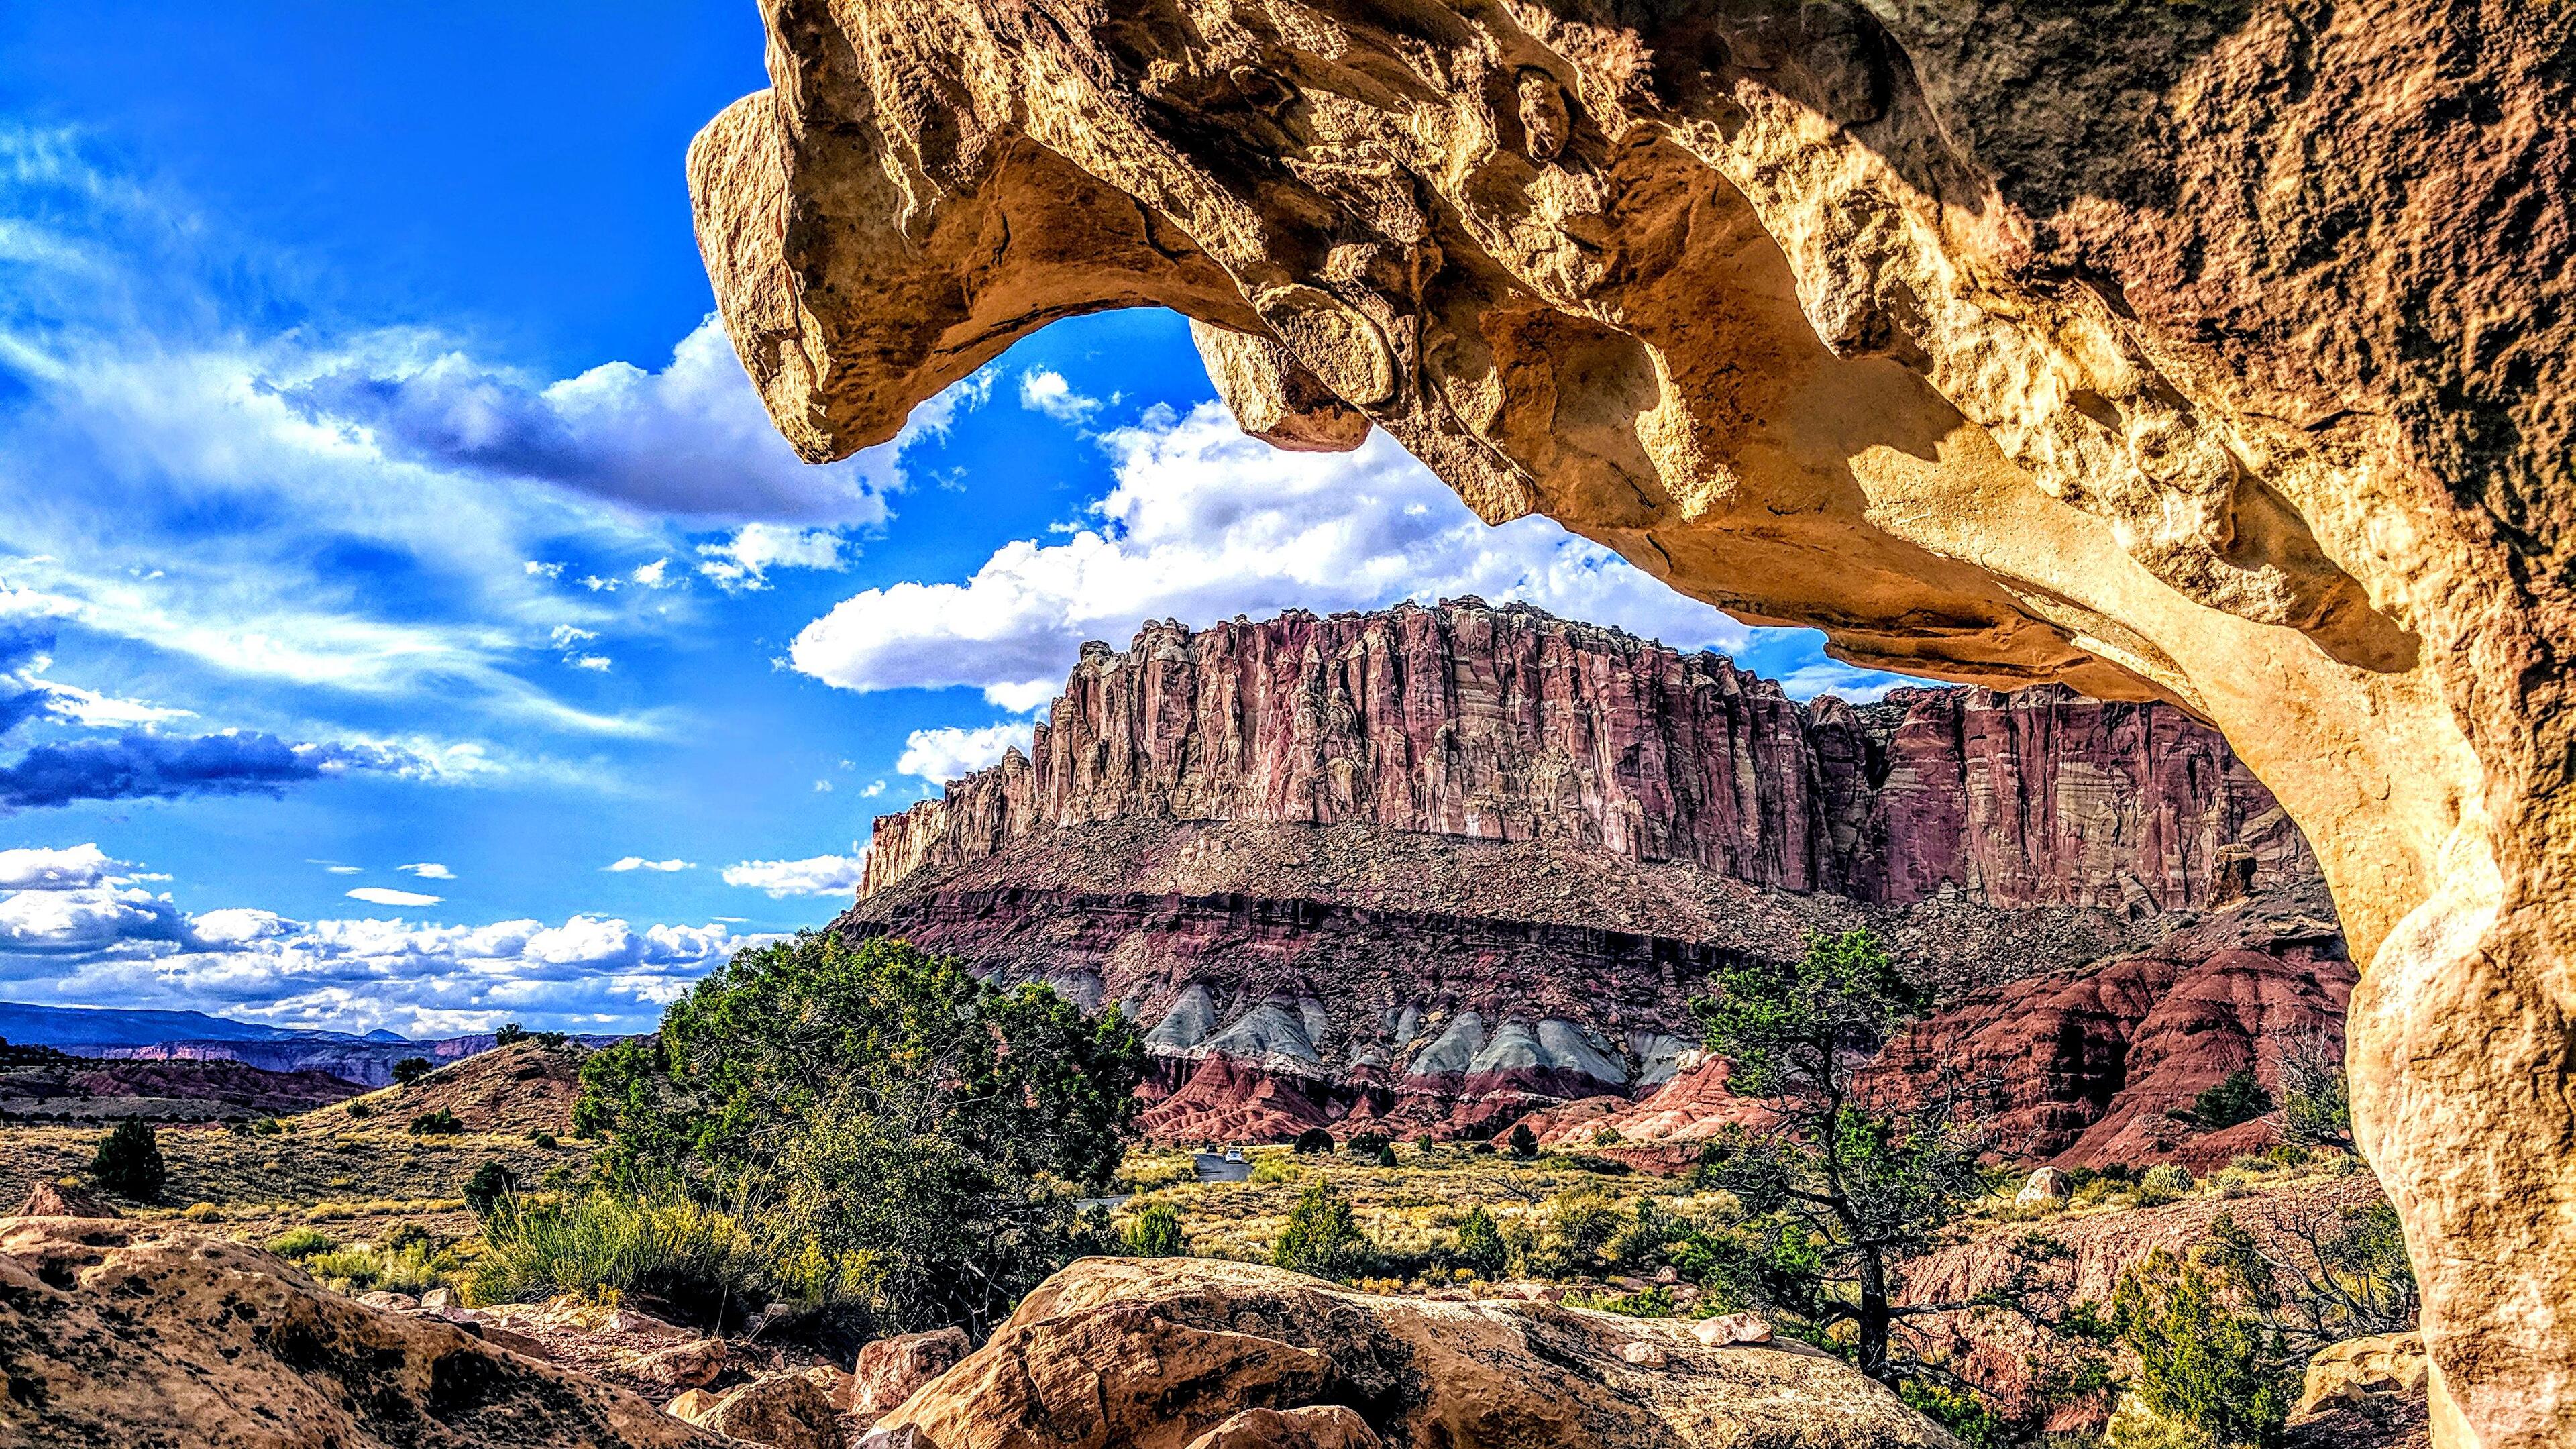 Utah 4K wallpaper for your desktop or mobile screen free and easy to download